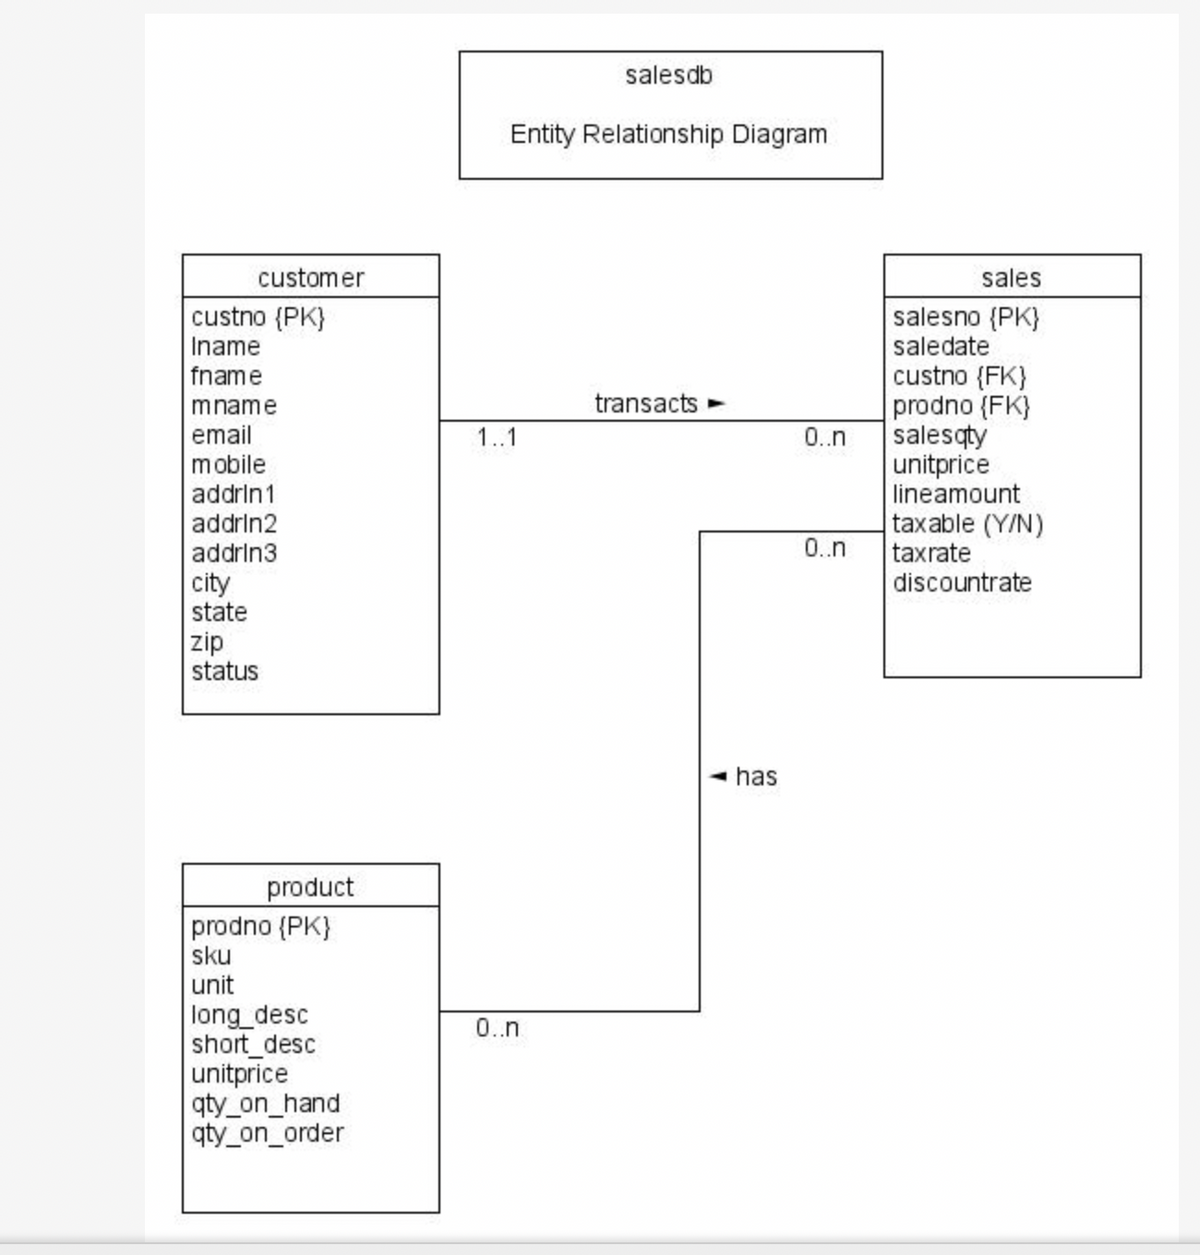 salesdb
Entity Relationship Diagram
customer
sales
custno (PK}
salesno {PK}
saledate
Iname
fname
custno {FK}
prodno (FK}
salesqty
unitprice
lineamount
mname
transacts
email
1..1
0.n
mobile
addrin1
taxable (Y/N)
taxrate
addrin2
addrin3
0..n
|city
state
discountrate
zip
status
has
product
prodno (PK}
sku
unit
long desc
short_desc
unitprice
qty_on_hand
qty on_order
0.n
